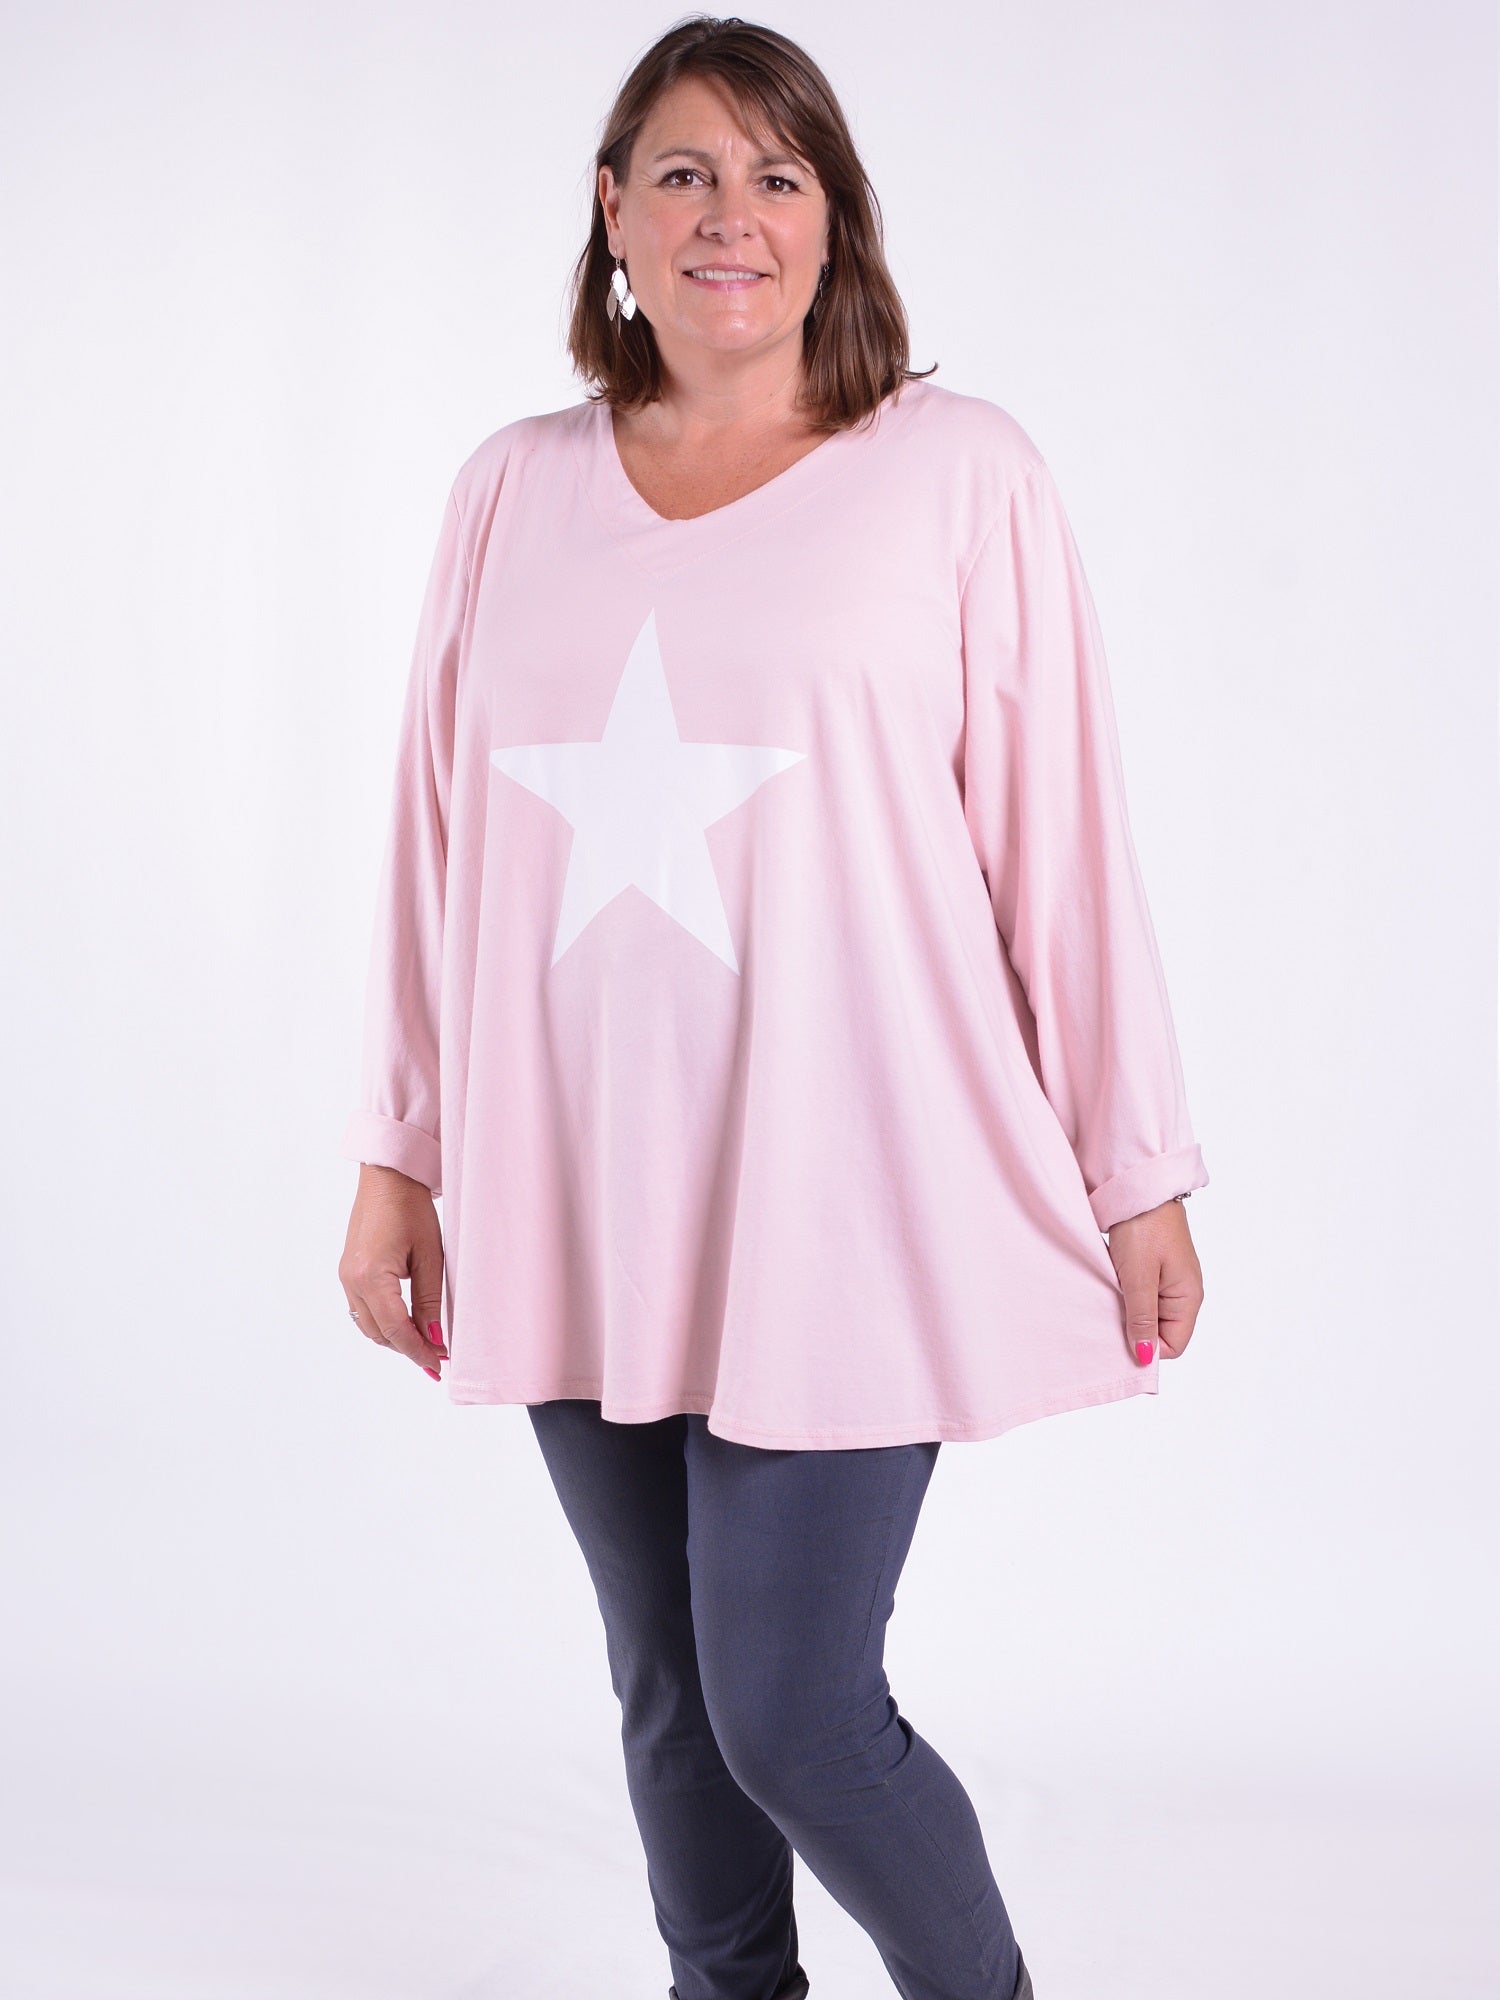 Cotton Swing Tee Shirt Long Sleeve - 20520 STAR, Tops & Shirts, Pure Plus Clothing, Lagenlook Clothing, Plus Size Fashion, Over 50 Fashion